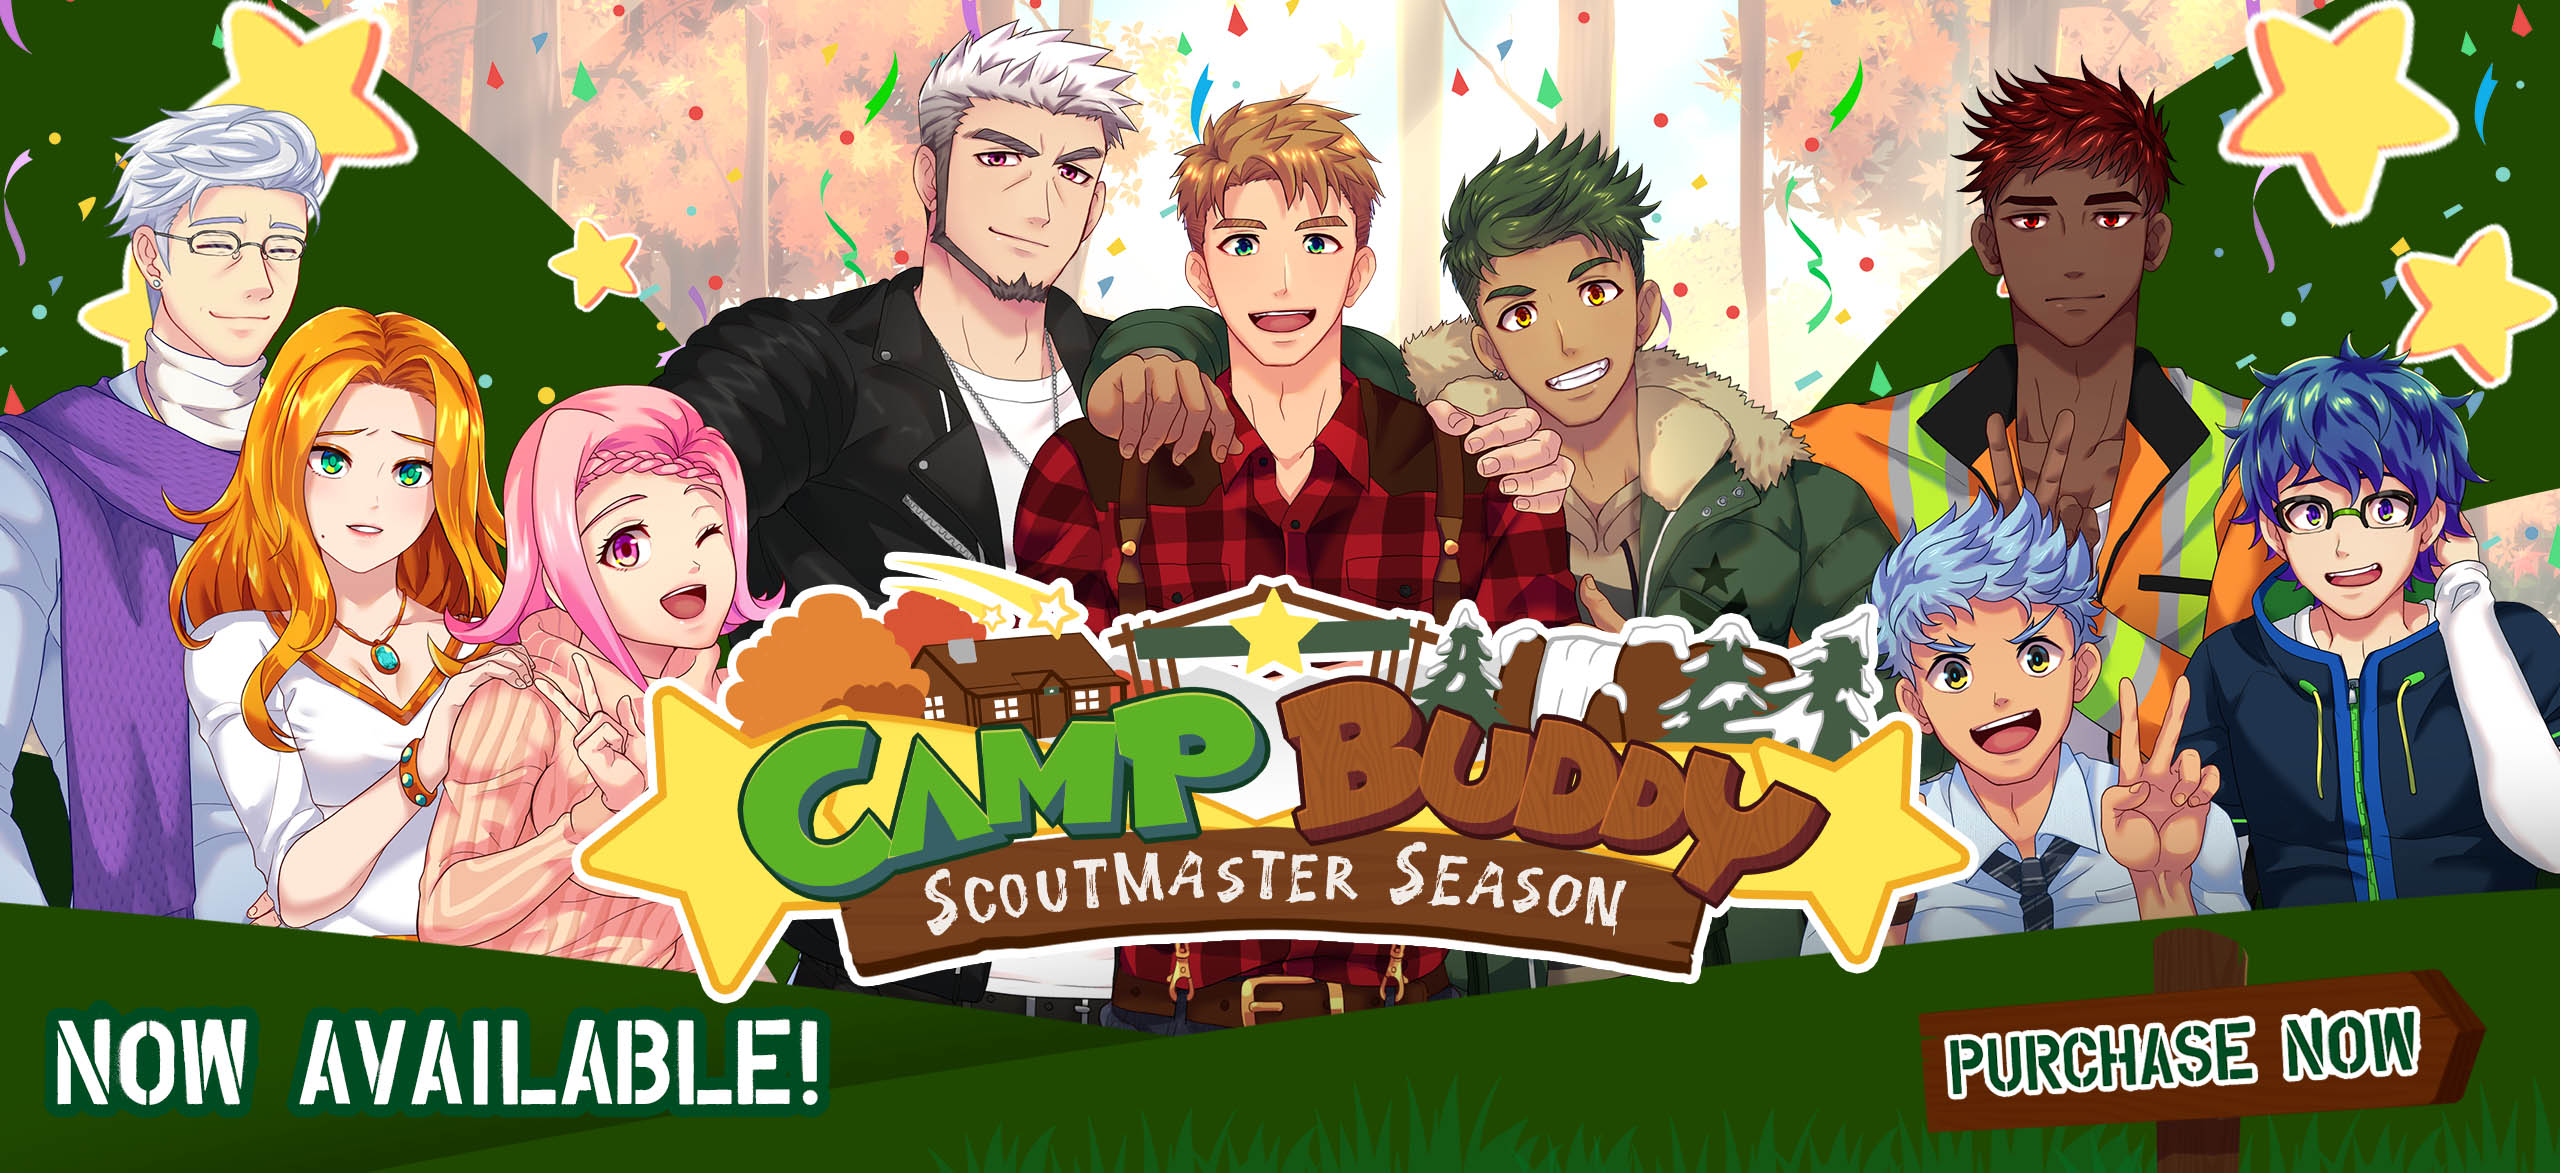 Camp Buddy Scoutmaster Season Available Now Blits Games